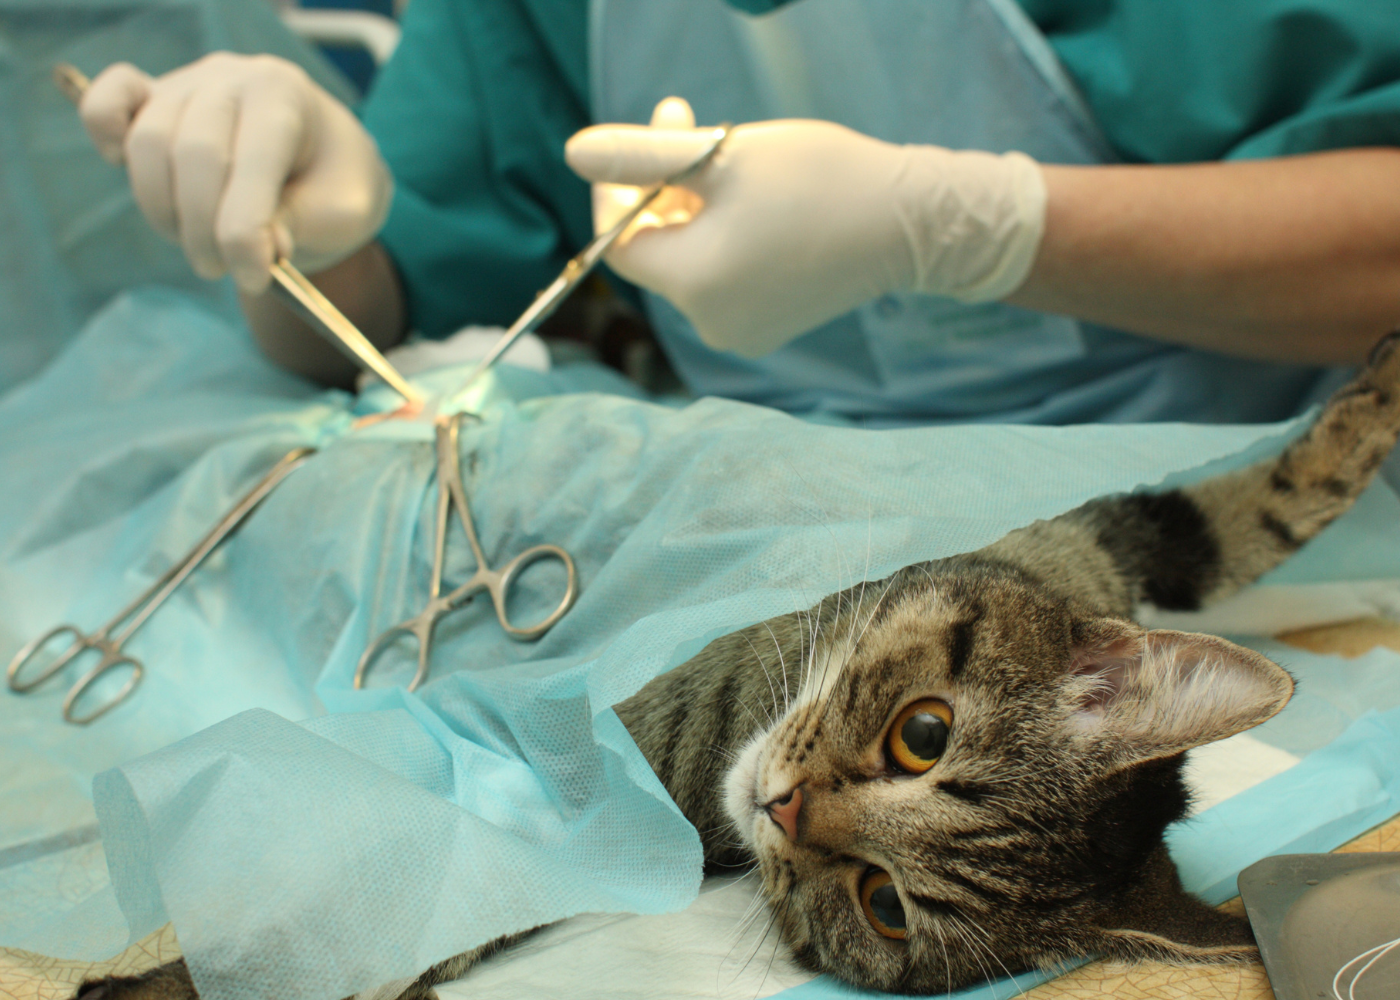 Spaying female cats